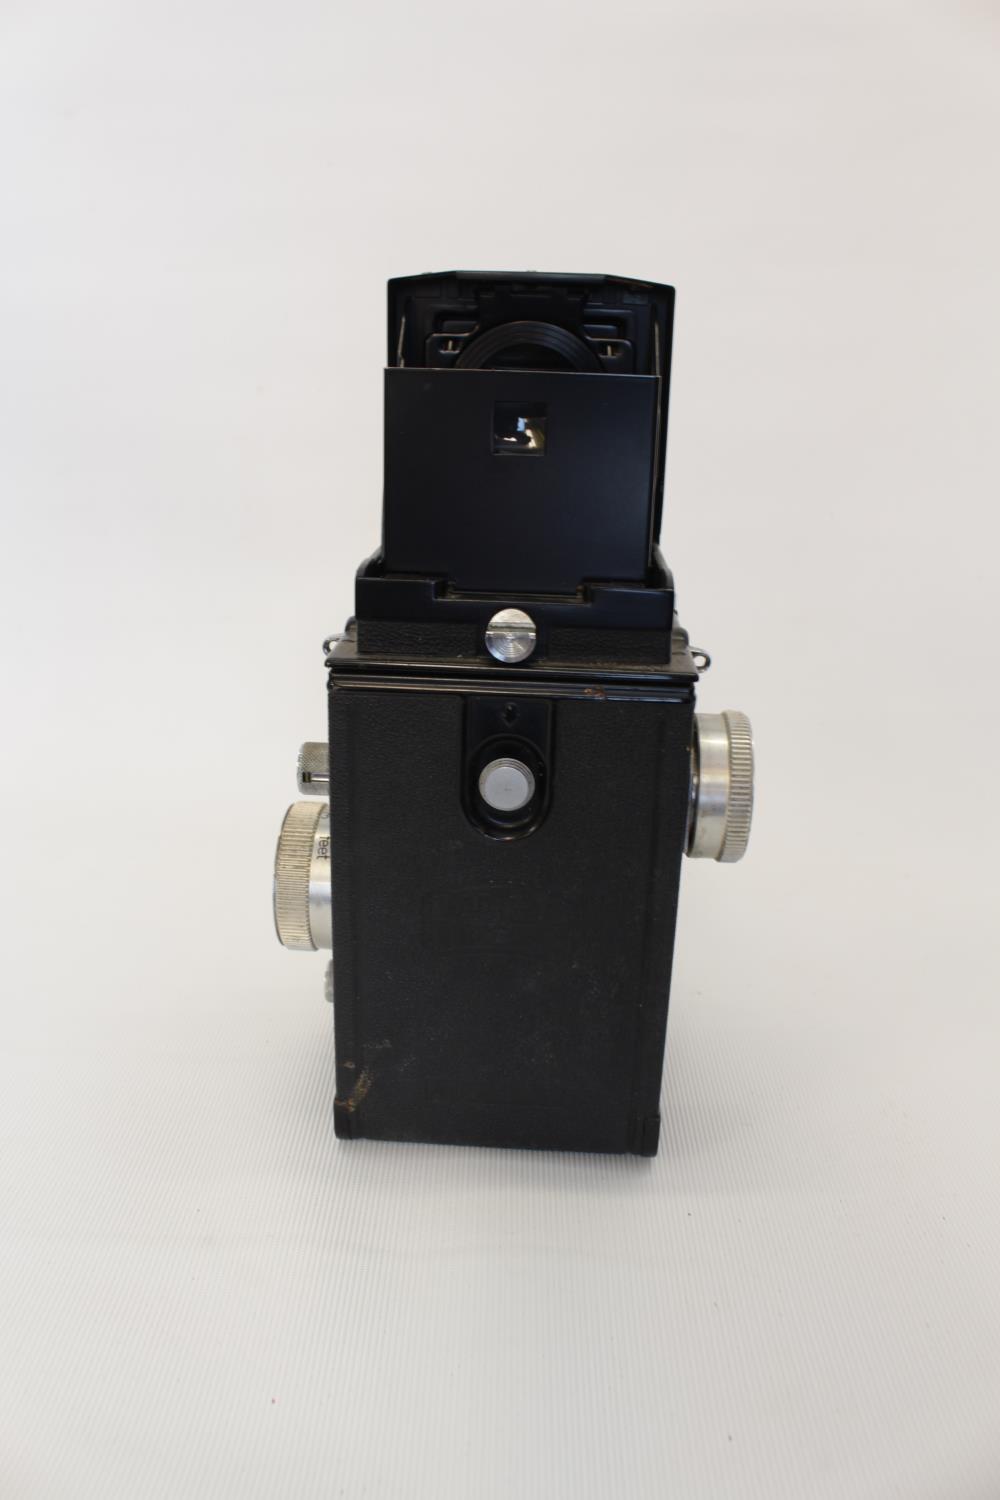 Zeiss Ikon Ikoflex twin reflex camera with brown leather fitted case marked 1249/16 - Image 4 of 5